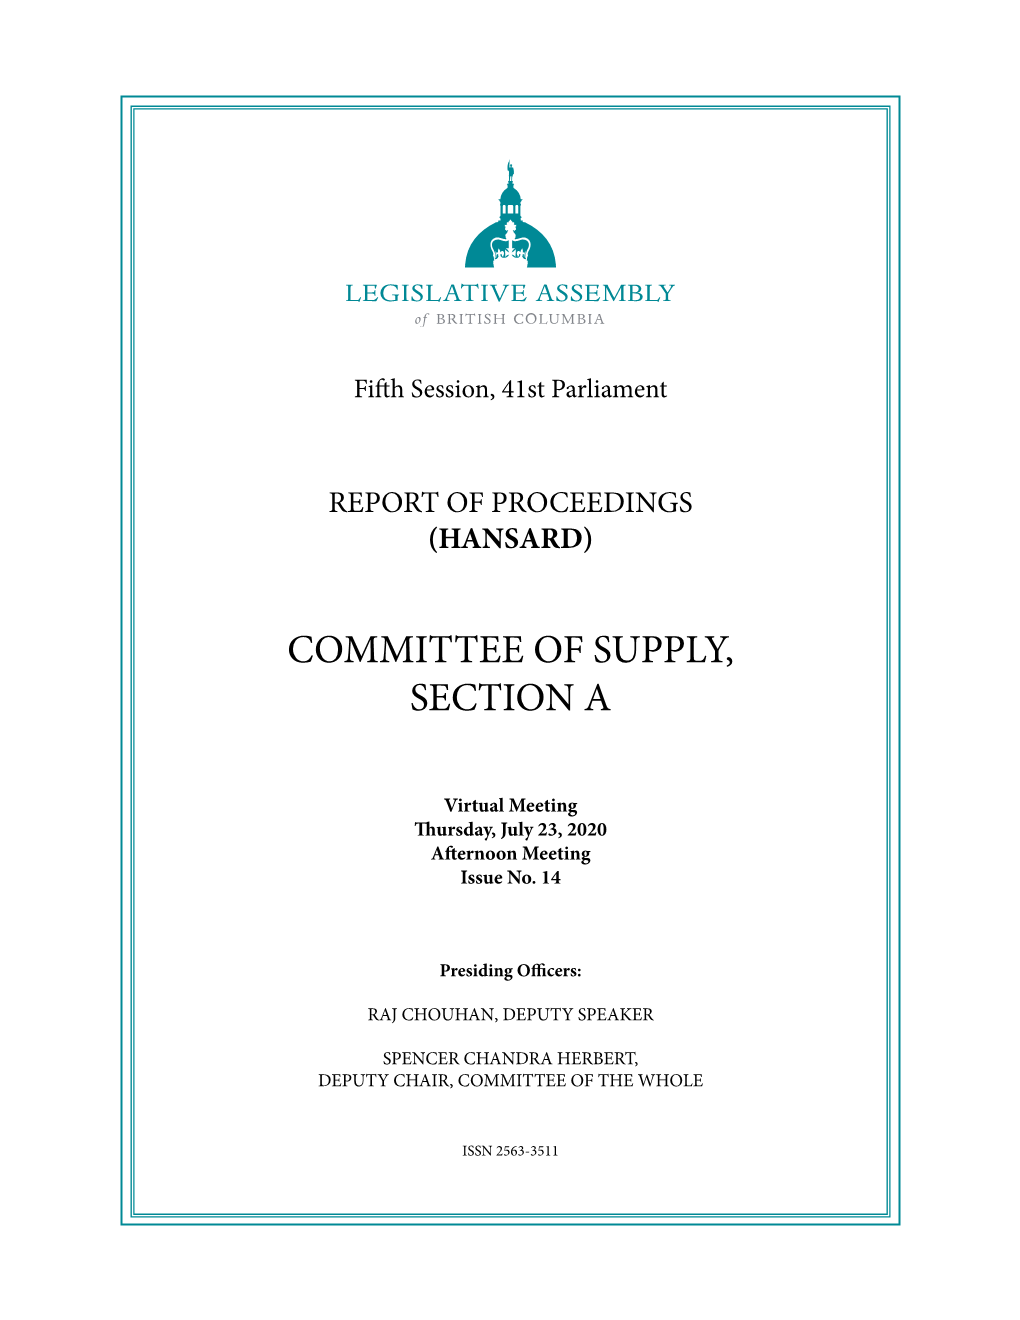 Committee of Supply, Section A